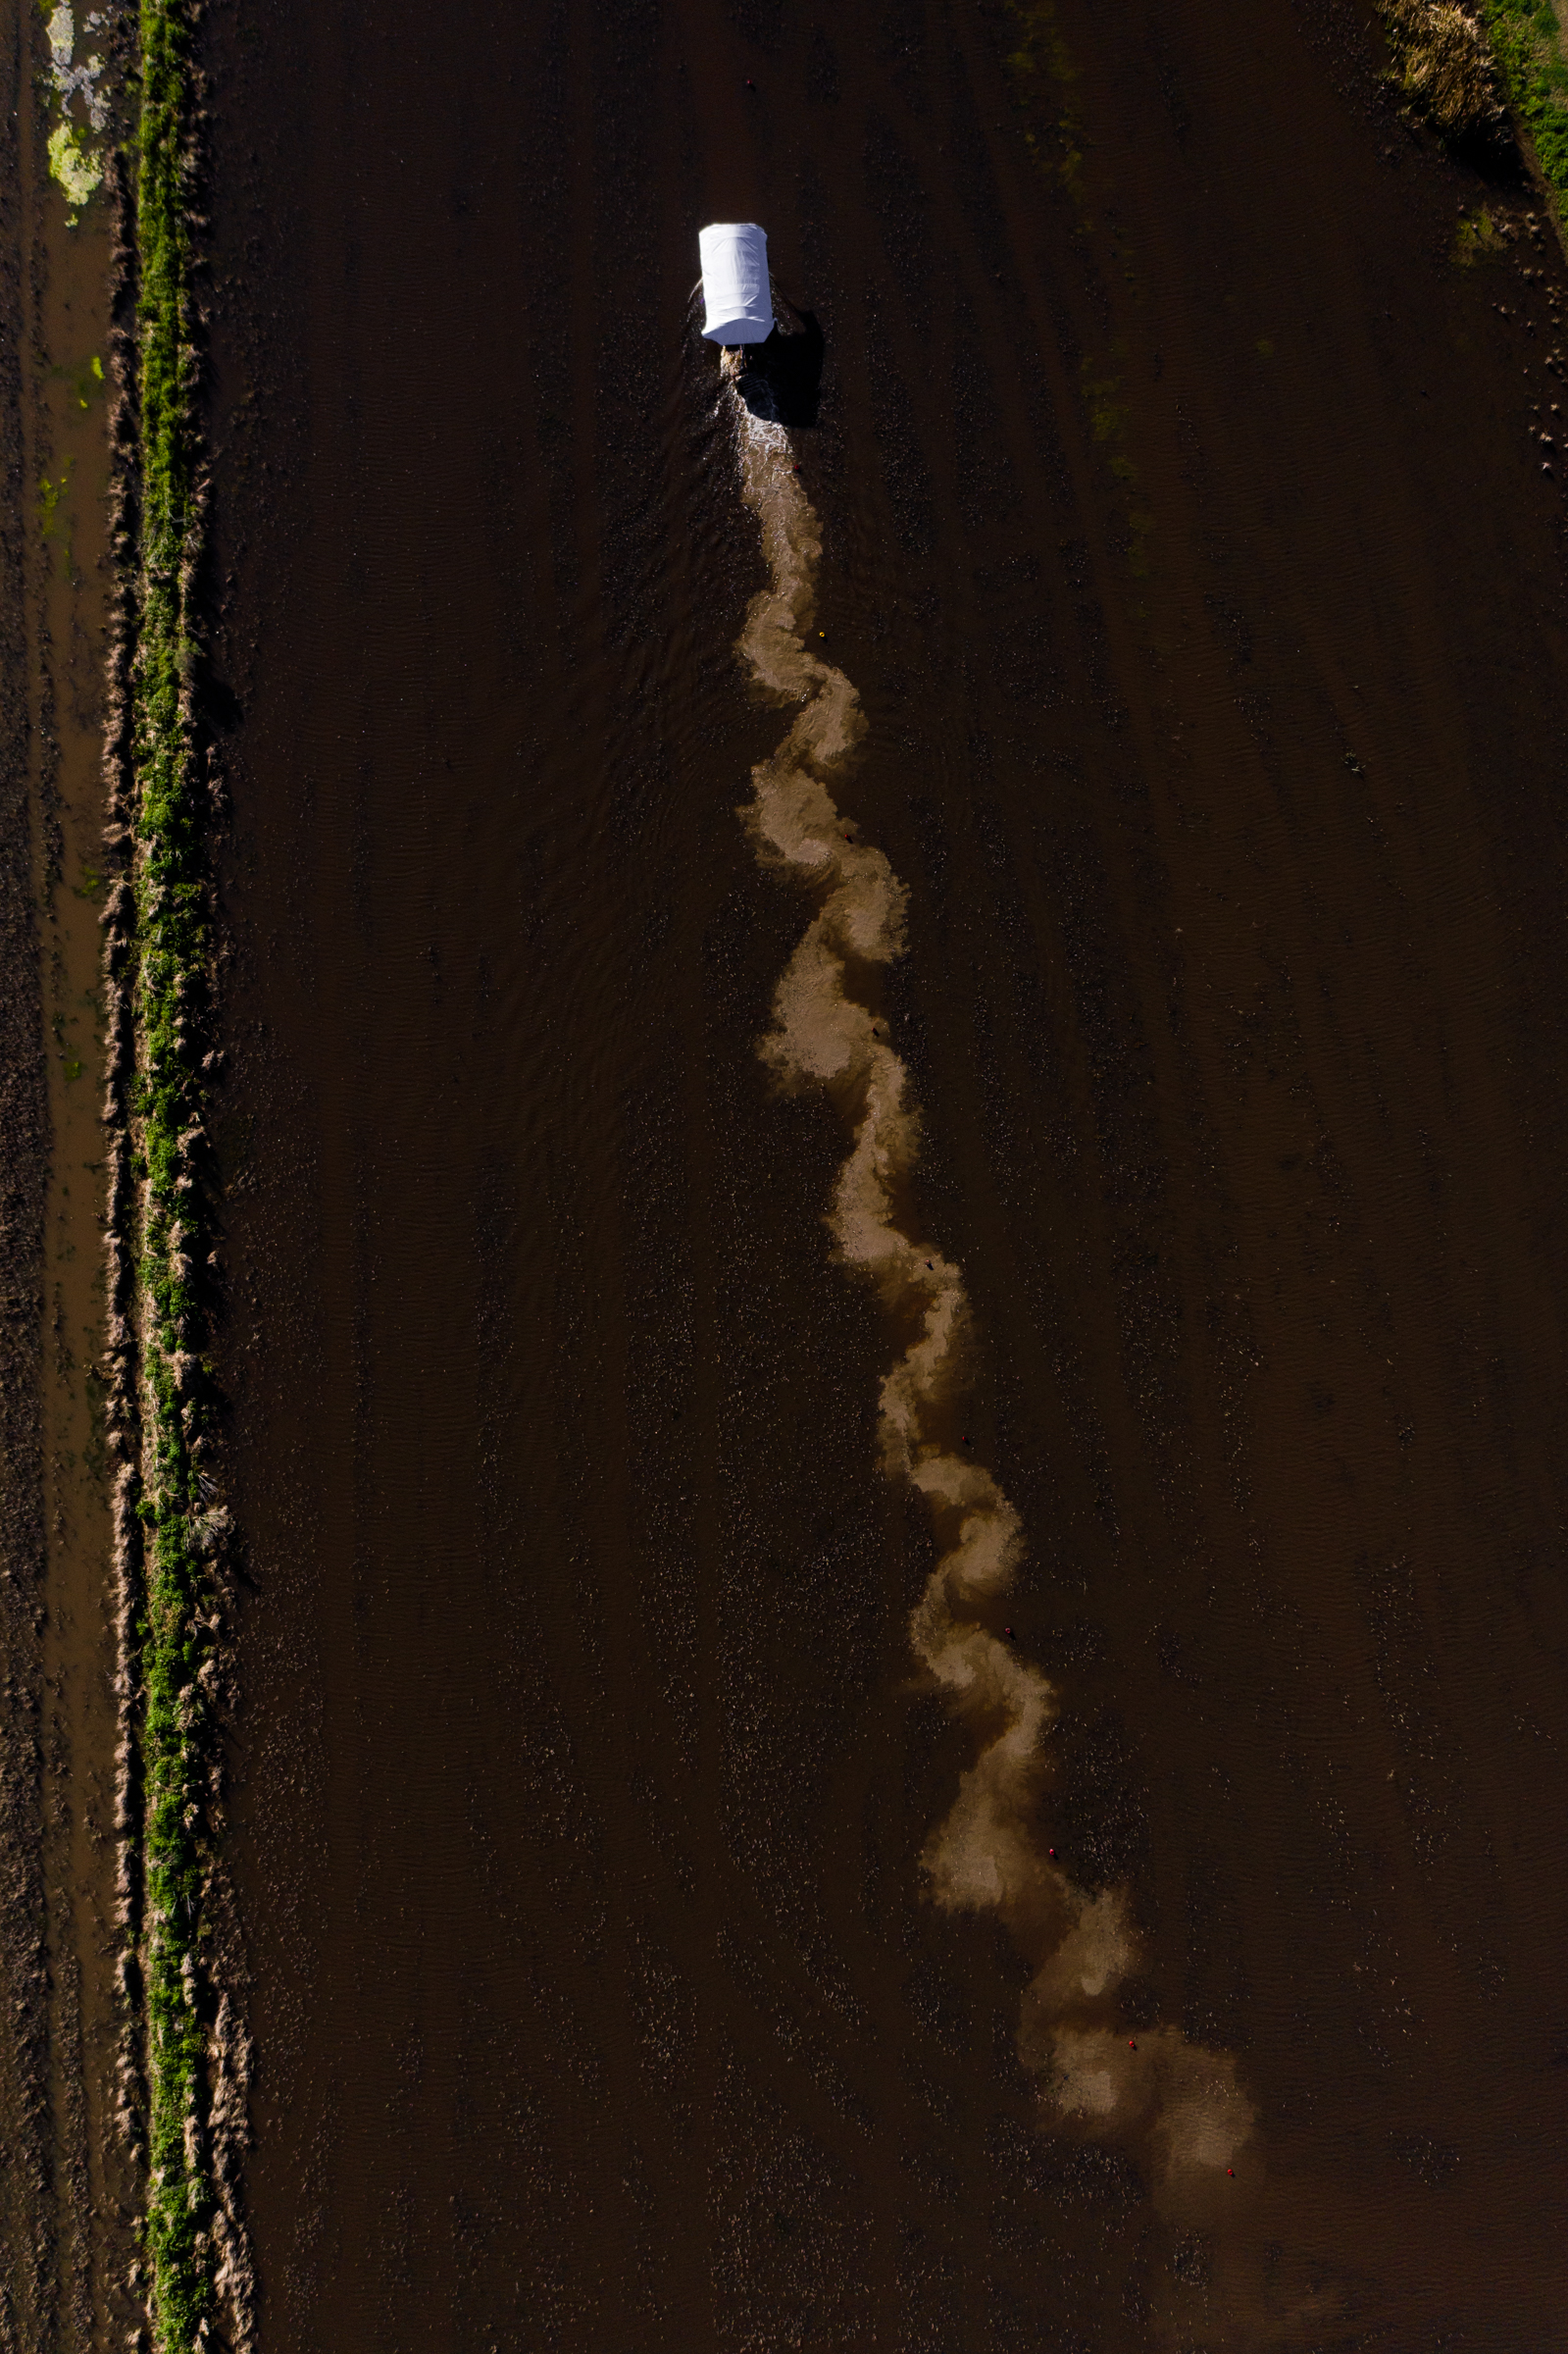 Aerial view of the mud trail behind a crawfish boat